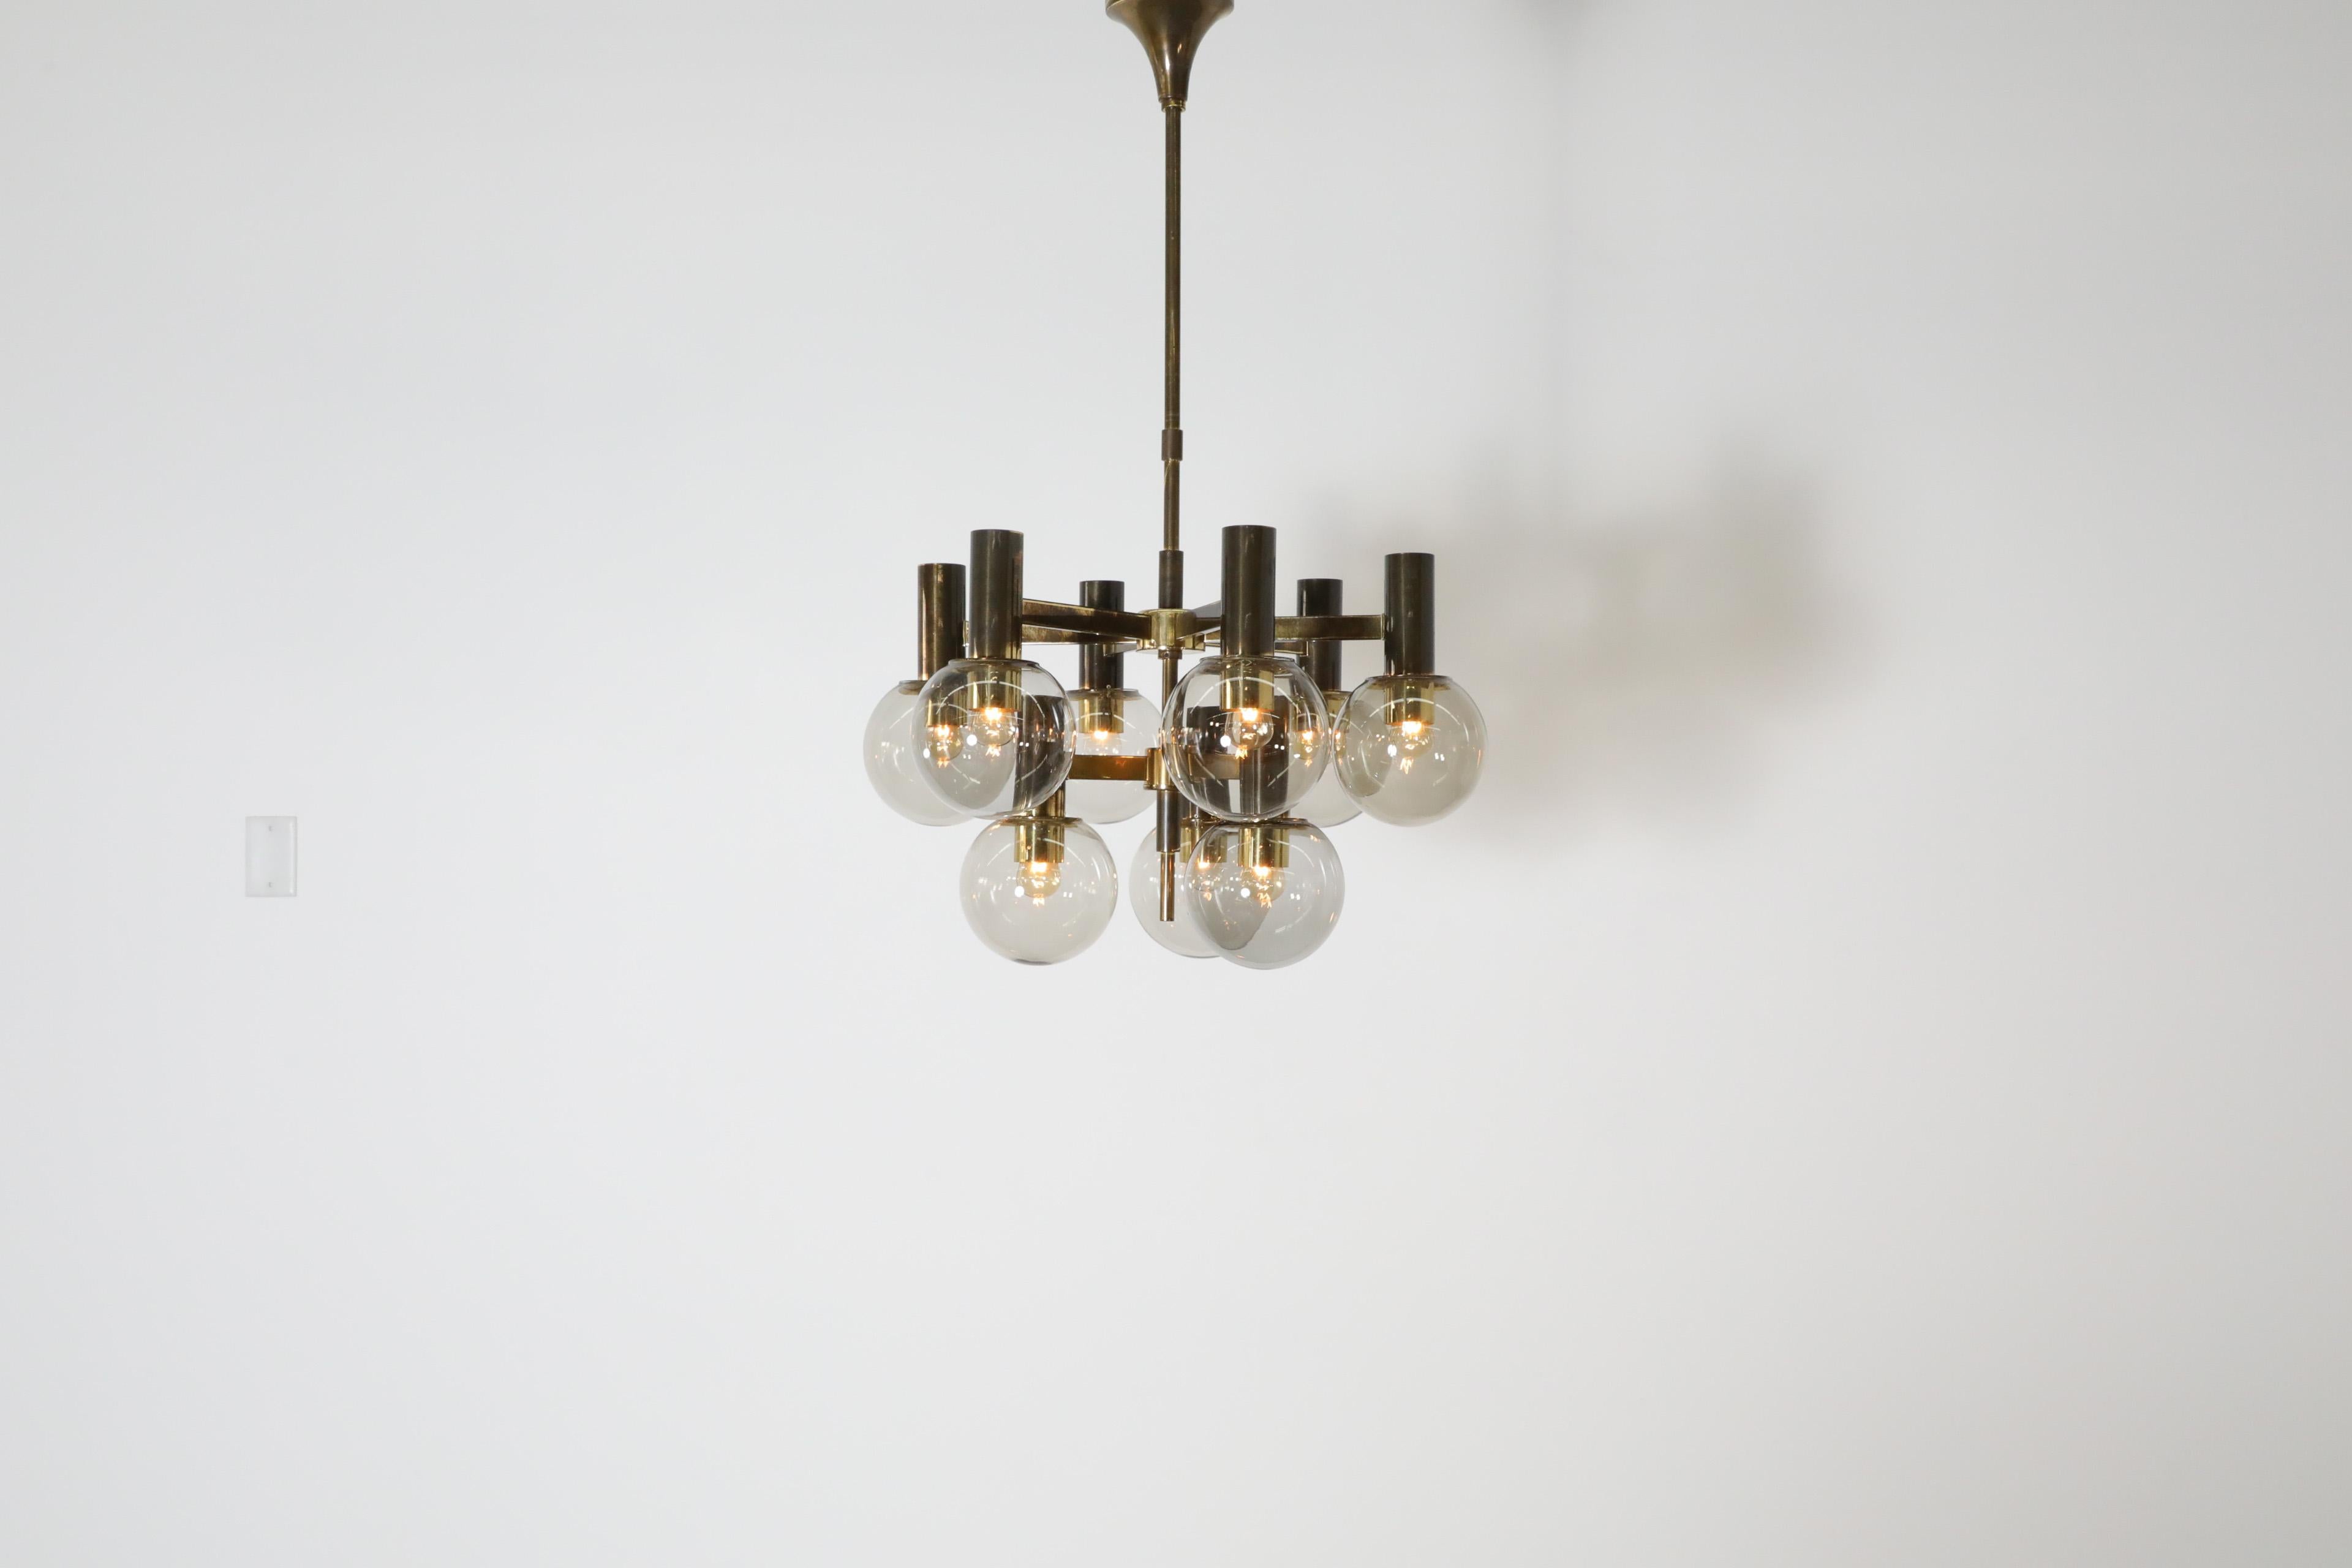 Gorgeous Mid-Century multi-armed chandelier in the style of Hans Agne Jacobssen. An elegant multi-armed chandelier with 9 smoked glass globe shades and brass fixtures. A perfect chandelier for complimenting an upscale dining space tying together a